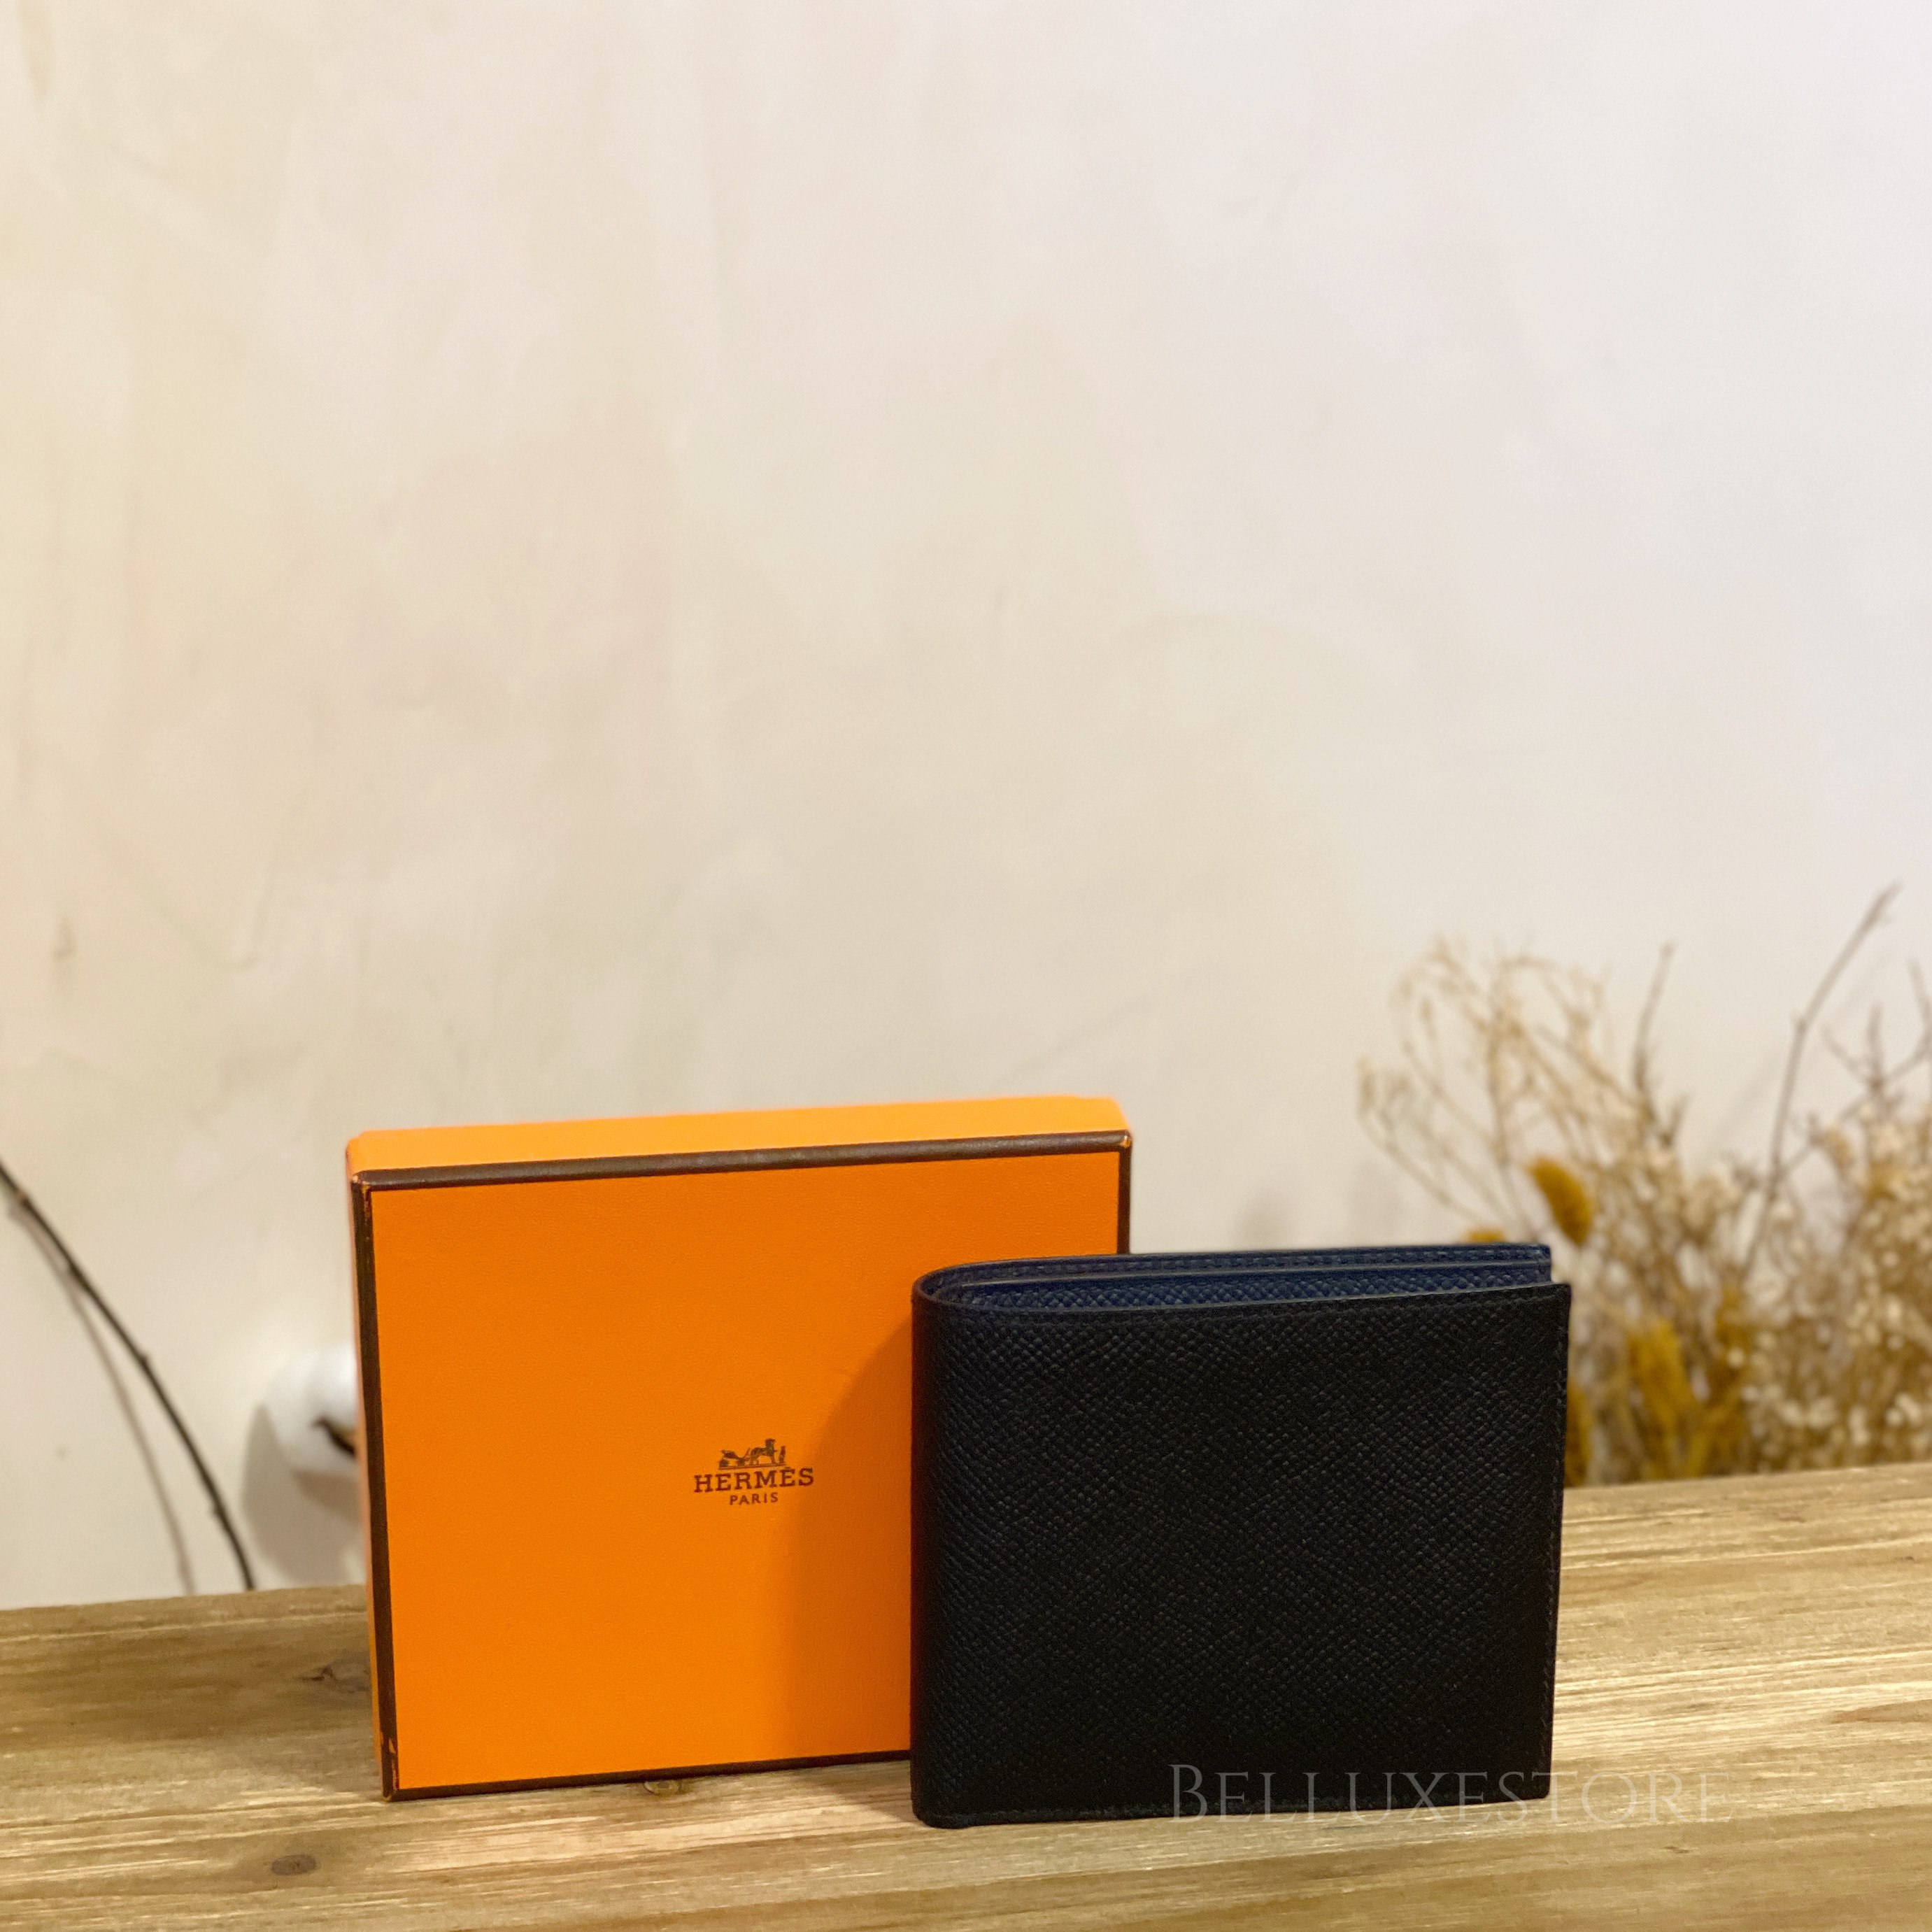 Unused] Hermes dogon compact wallet evercolor stamp B